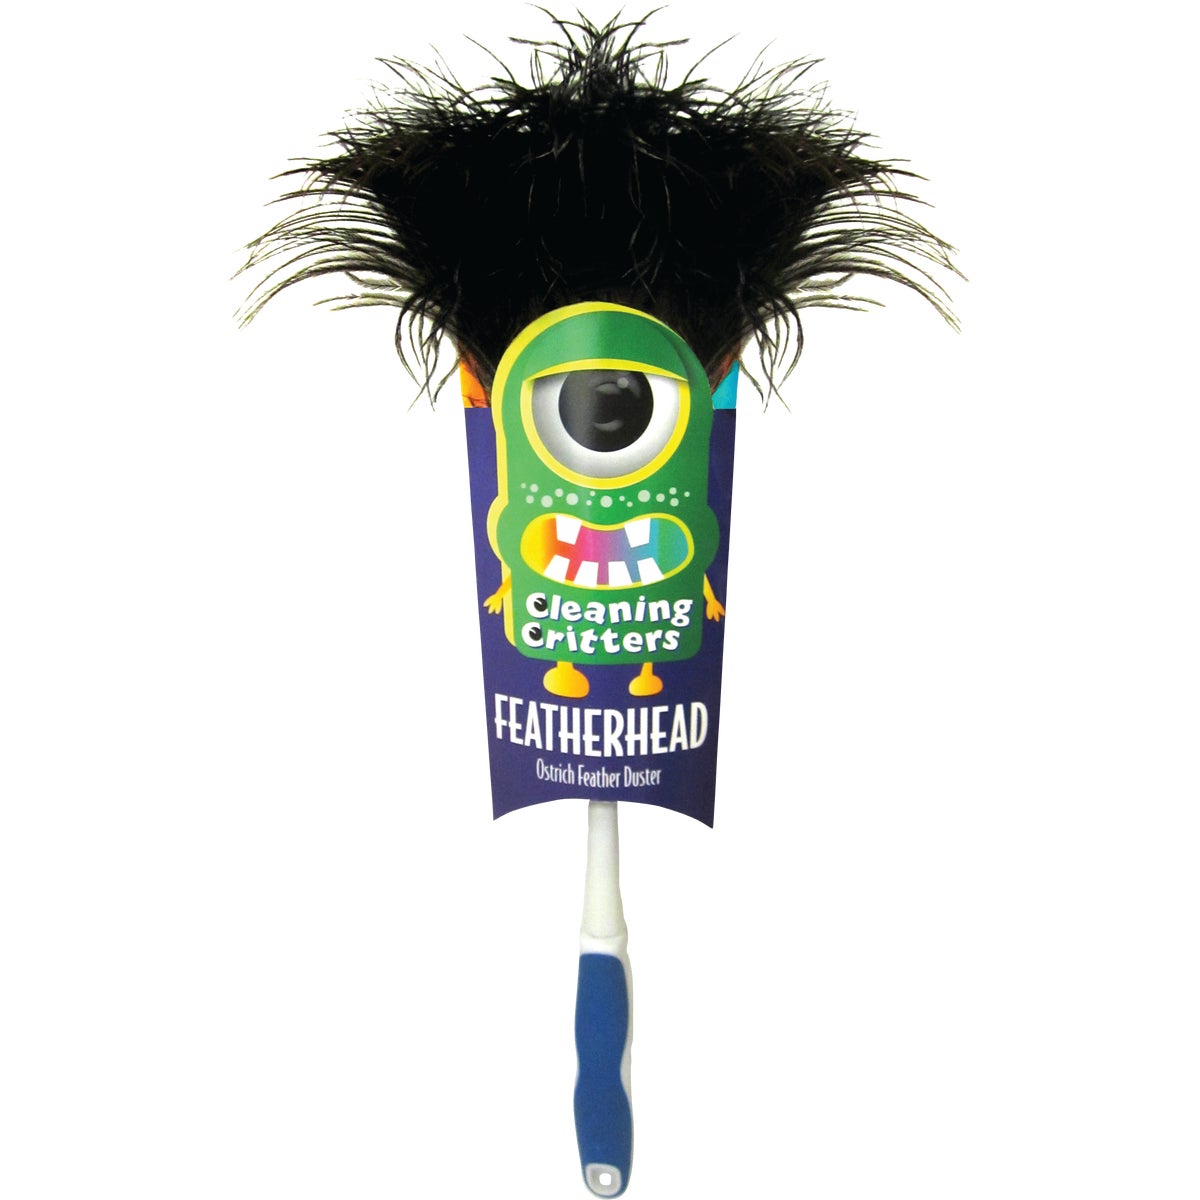 Item 601897, Ostrich feather duster with ergonomic handle, reaches deep crevices